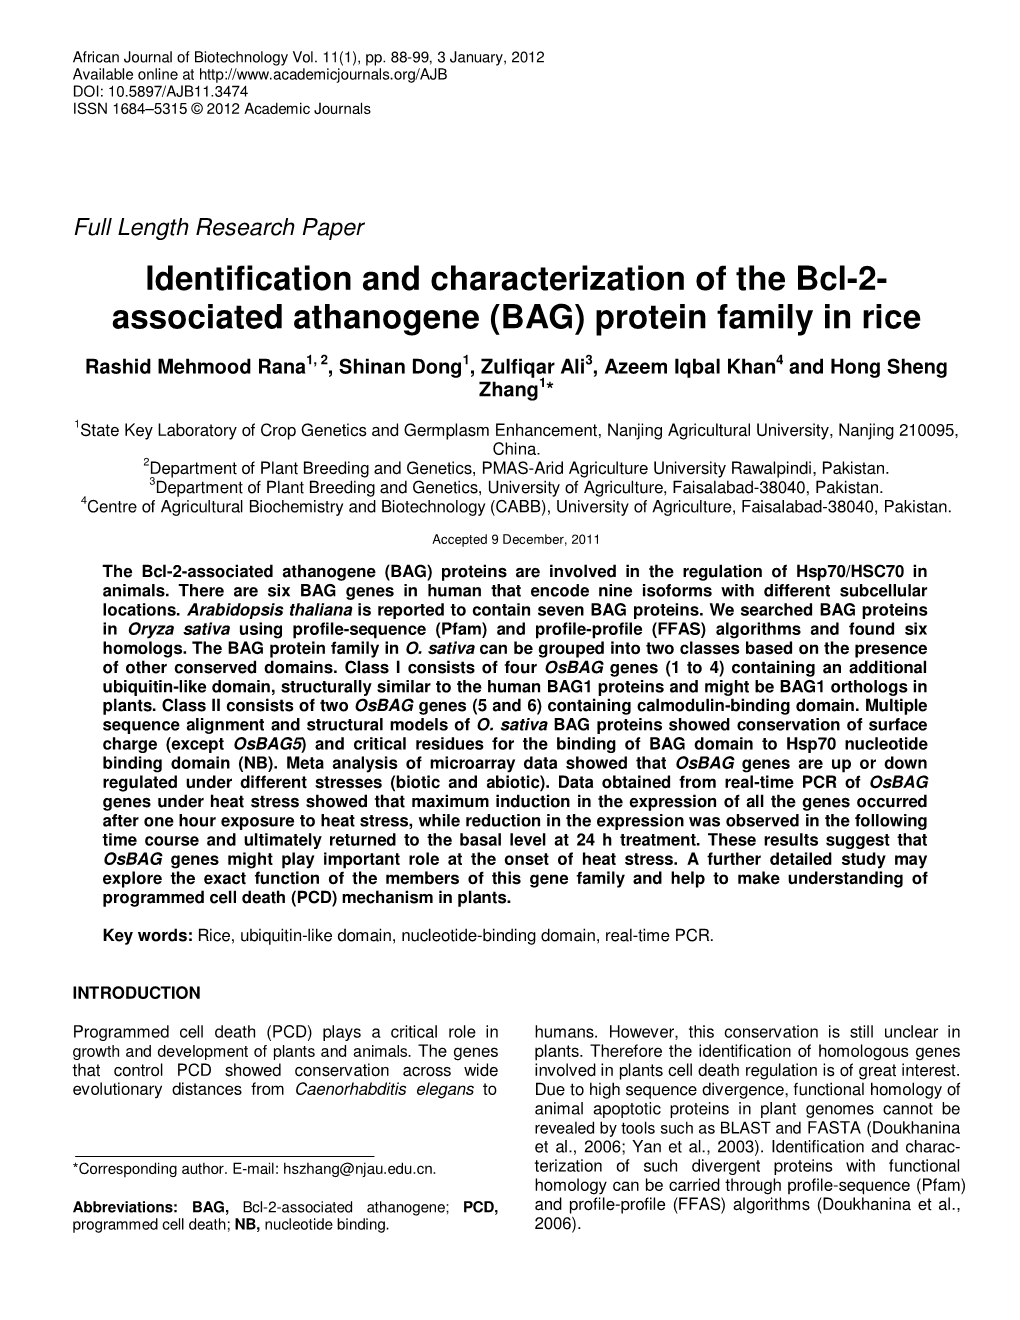 Associated Athanogene (BAG) Protein Family in Rice